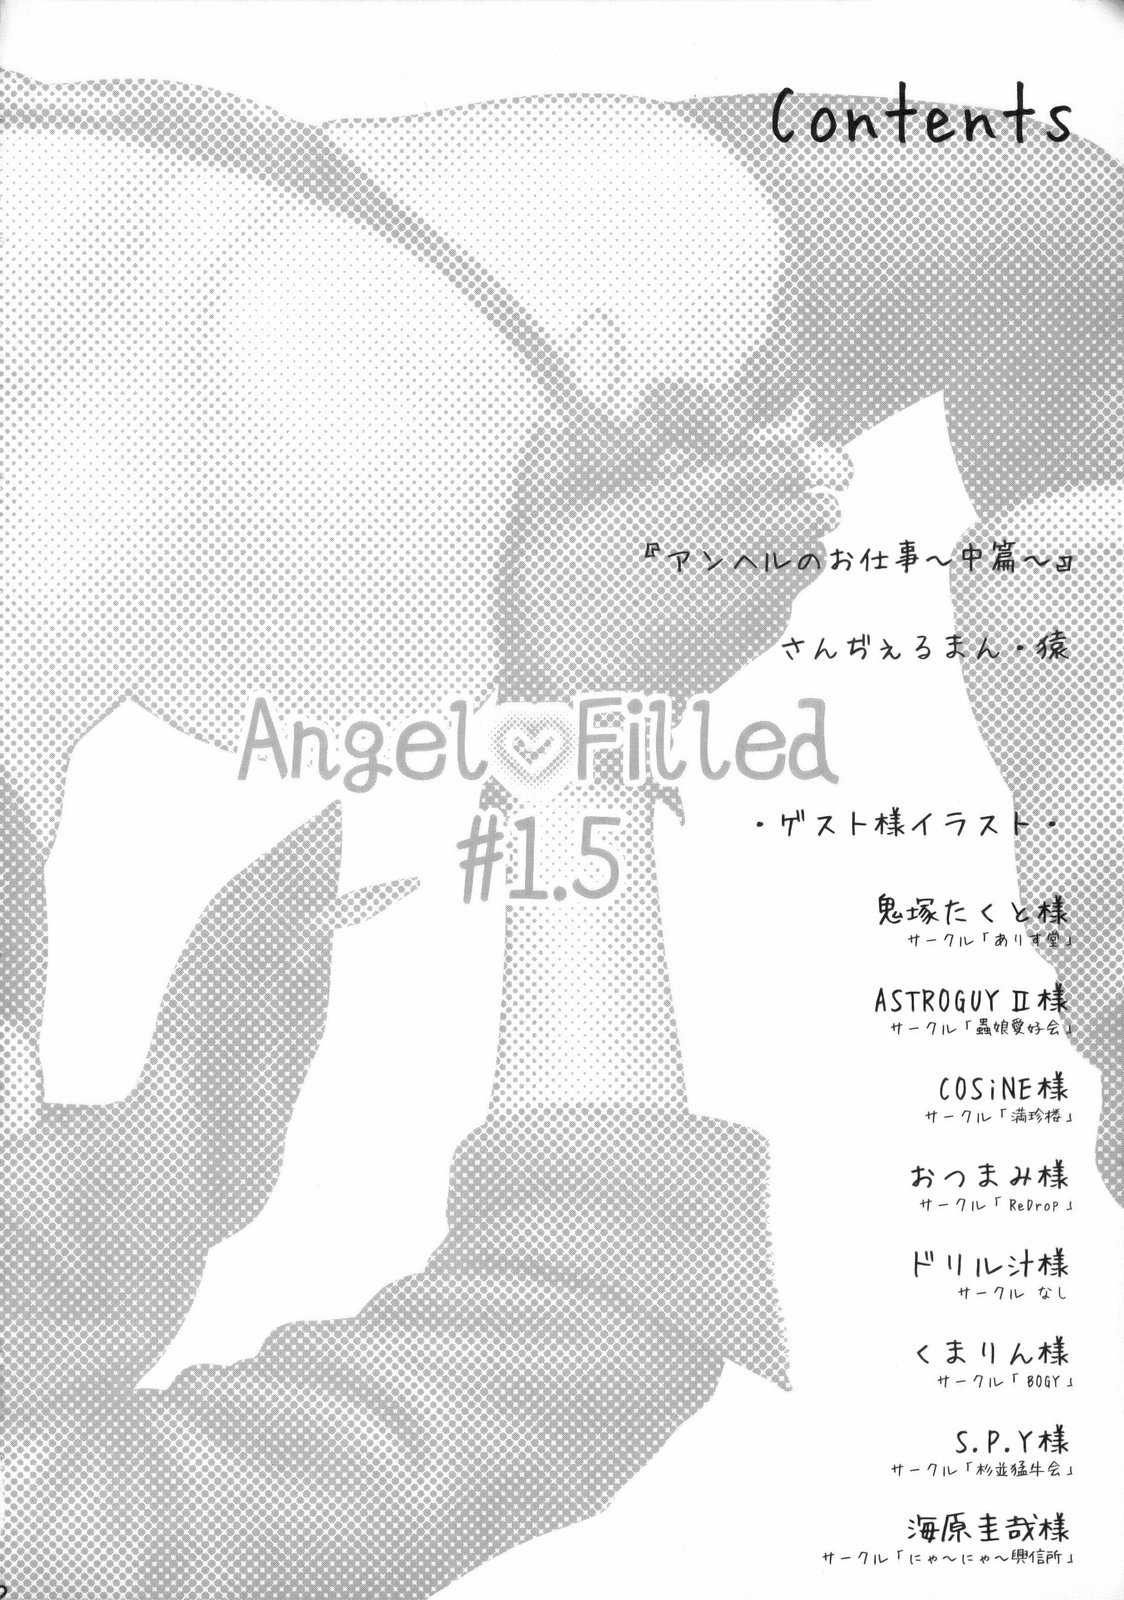 (C75) [Shinnihon Pepsitou (St.germain-sal)] Angel Filled #1.5 (King of Fighters) 2